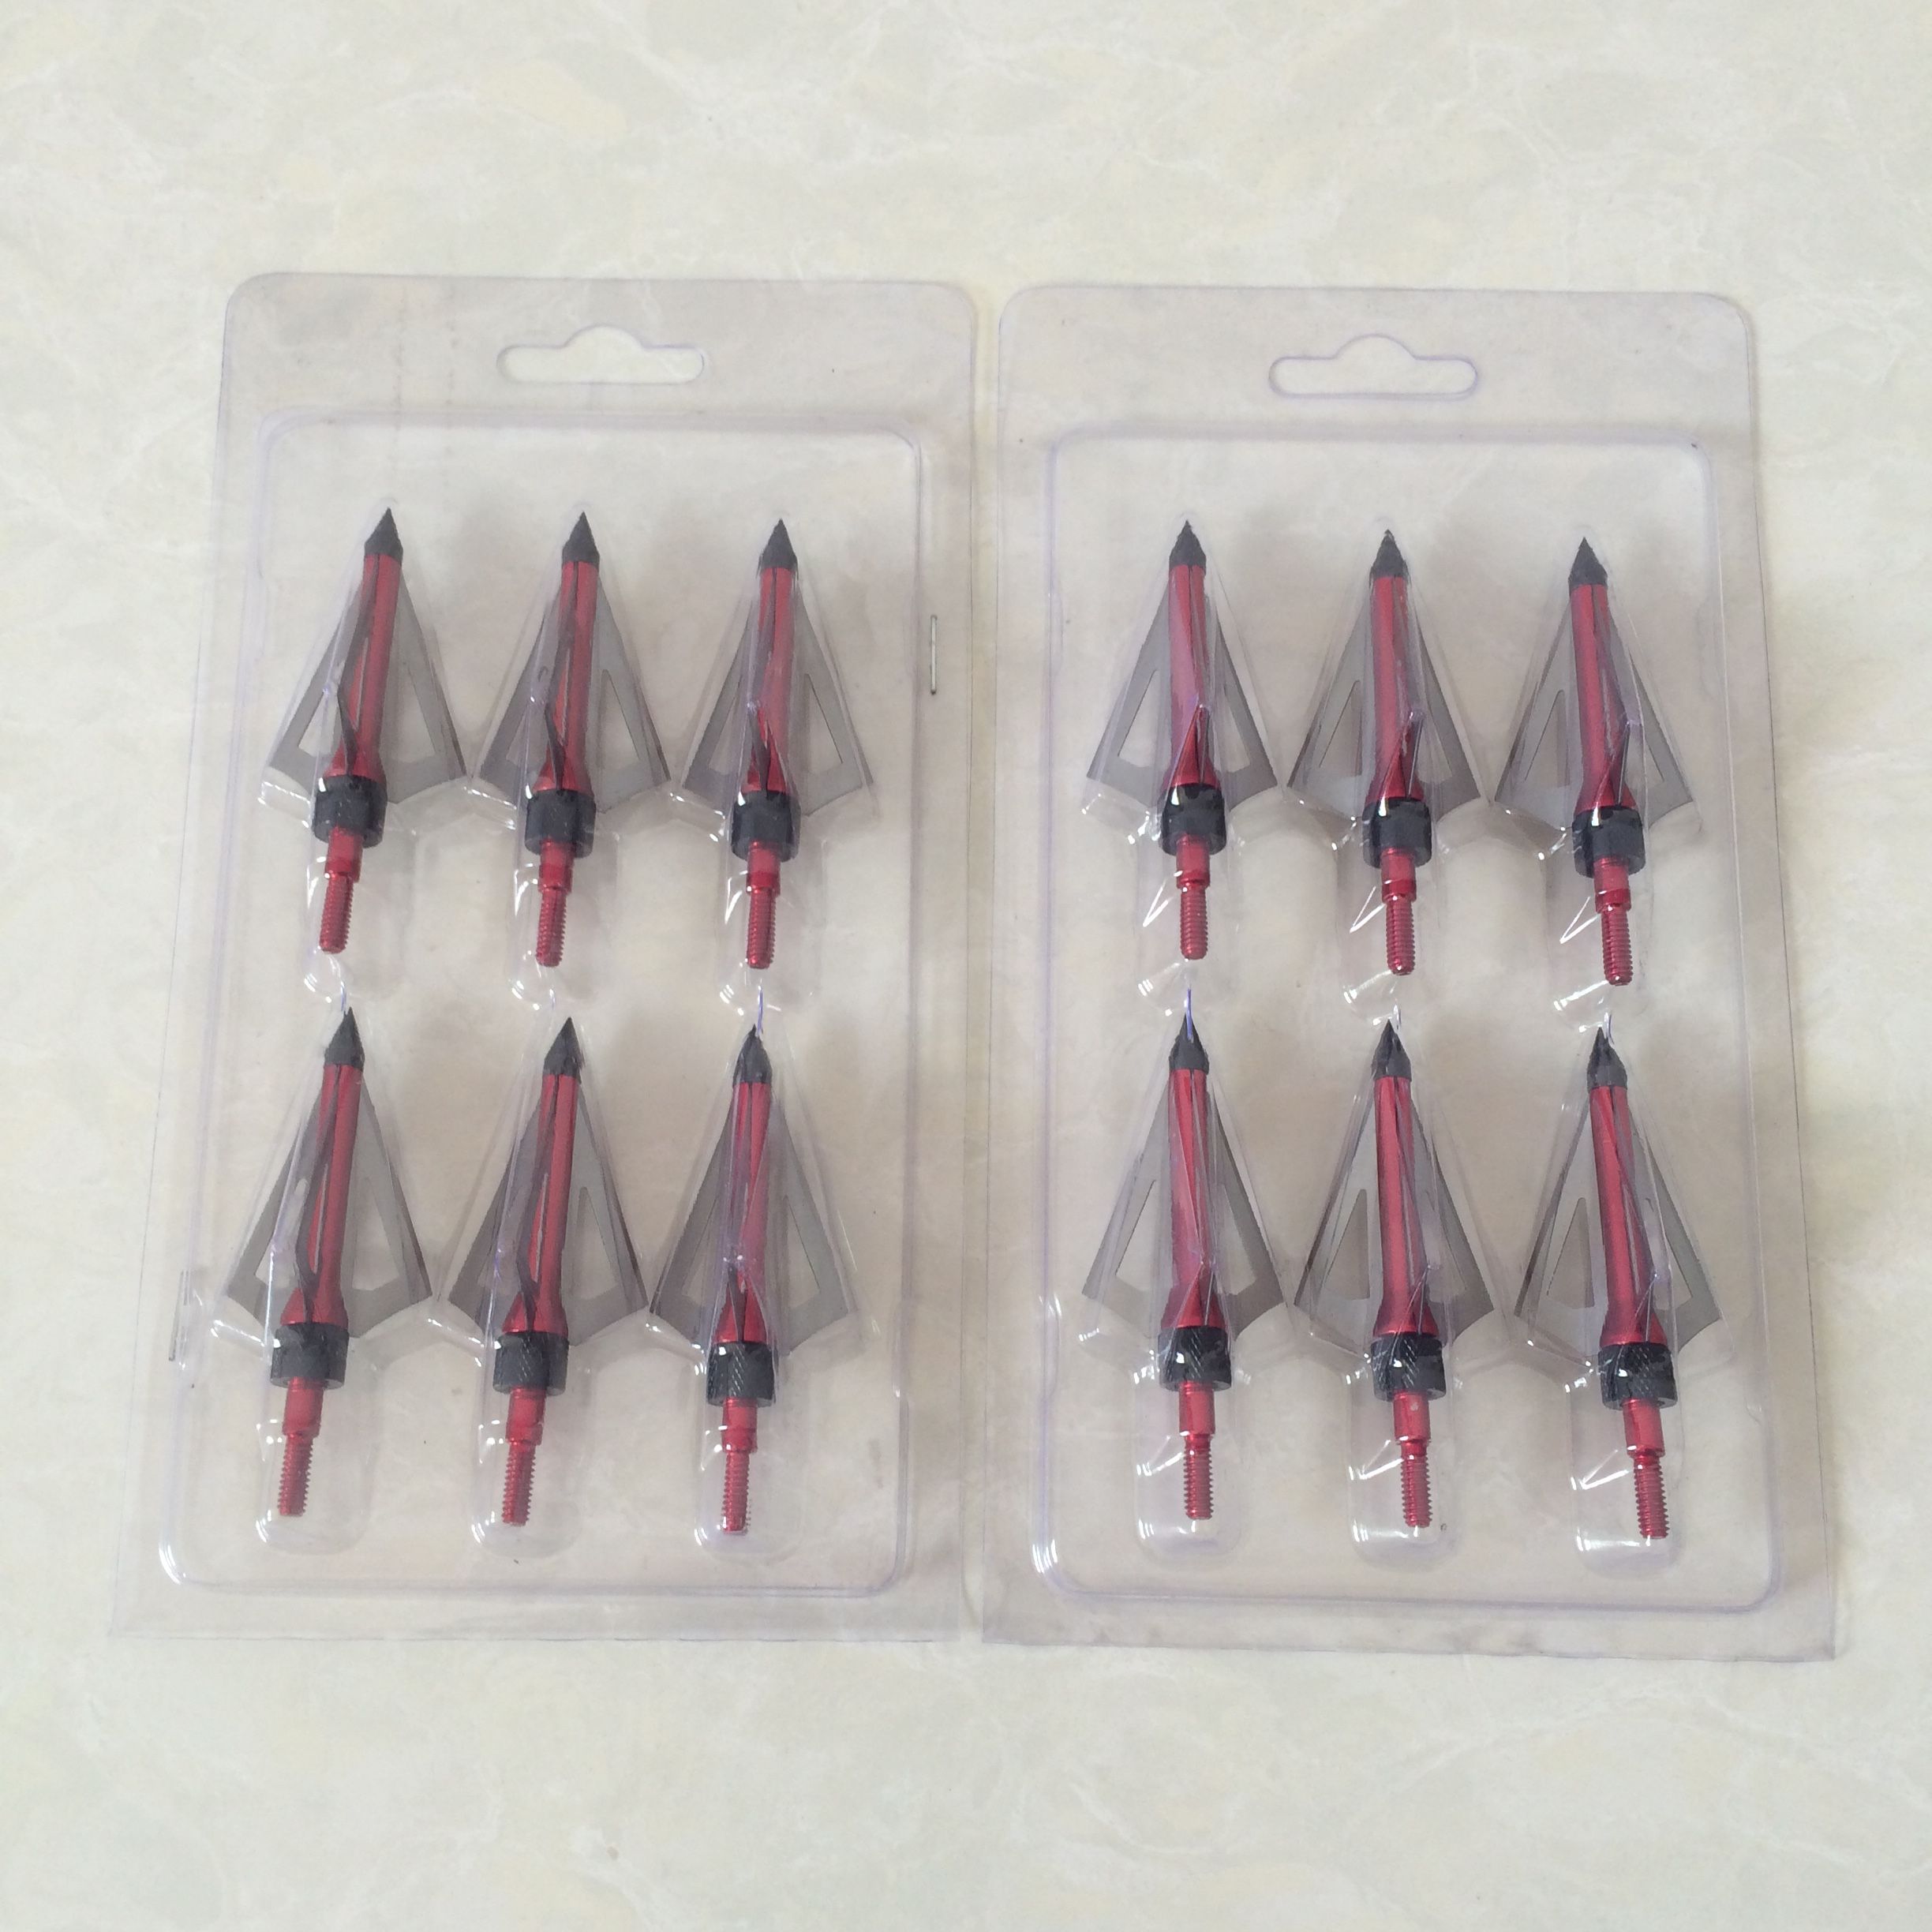 12Pcs Red Broadheads 100 Grain Arrowheads Hunting Compound Bow Crossbow Points